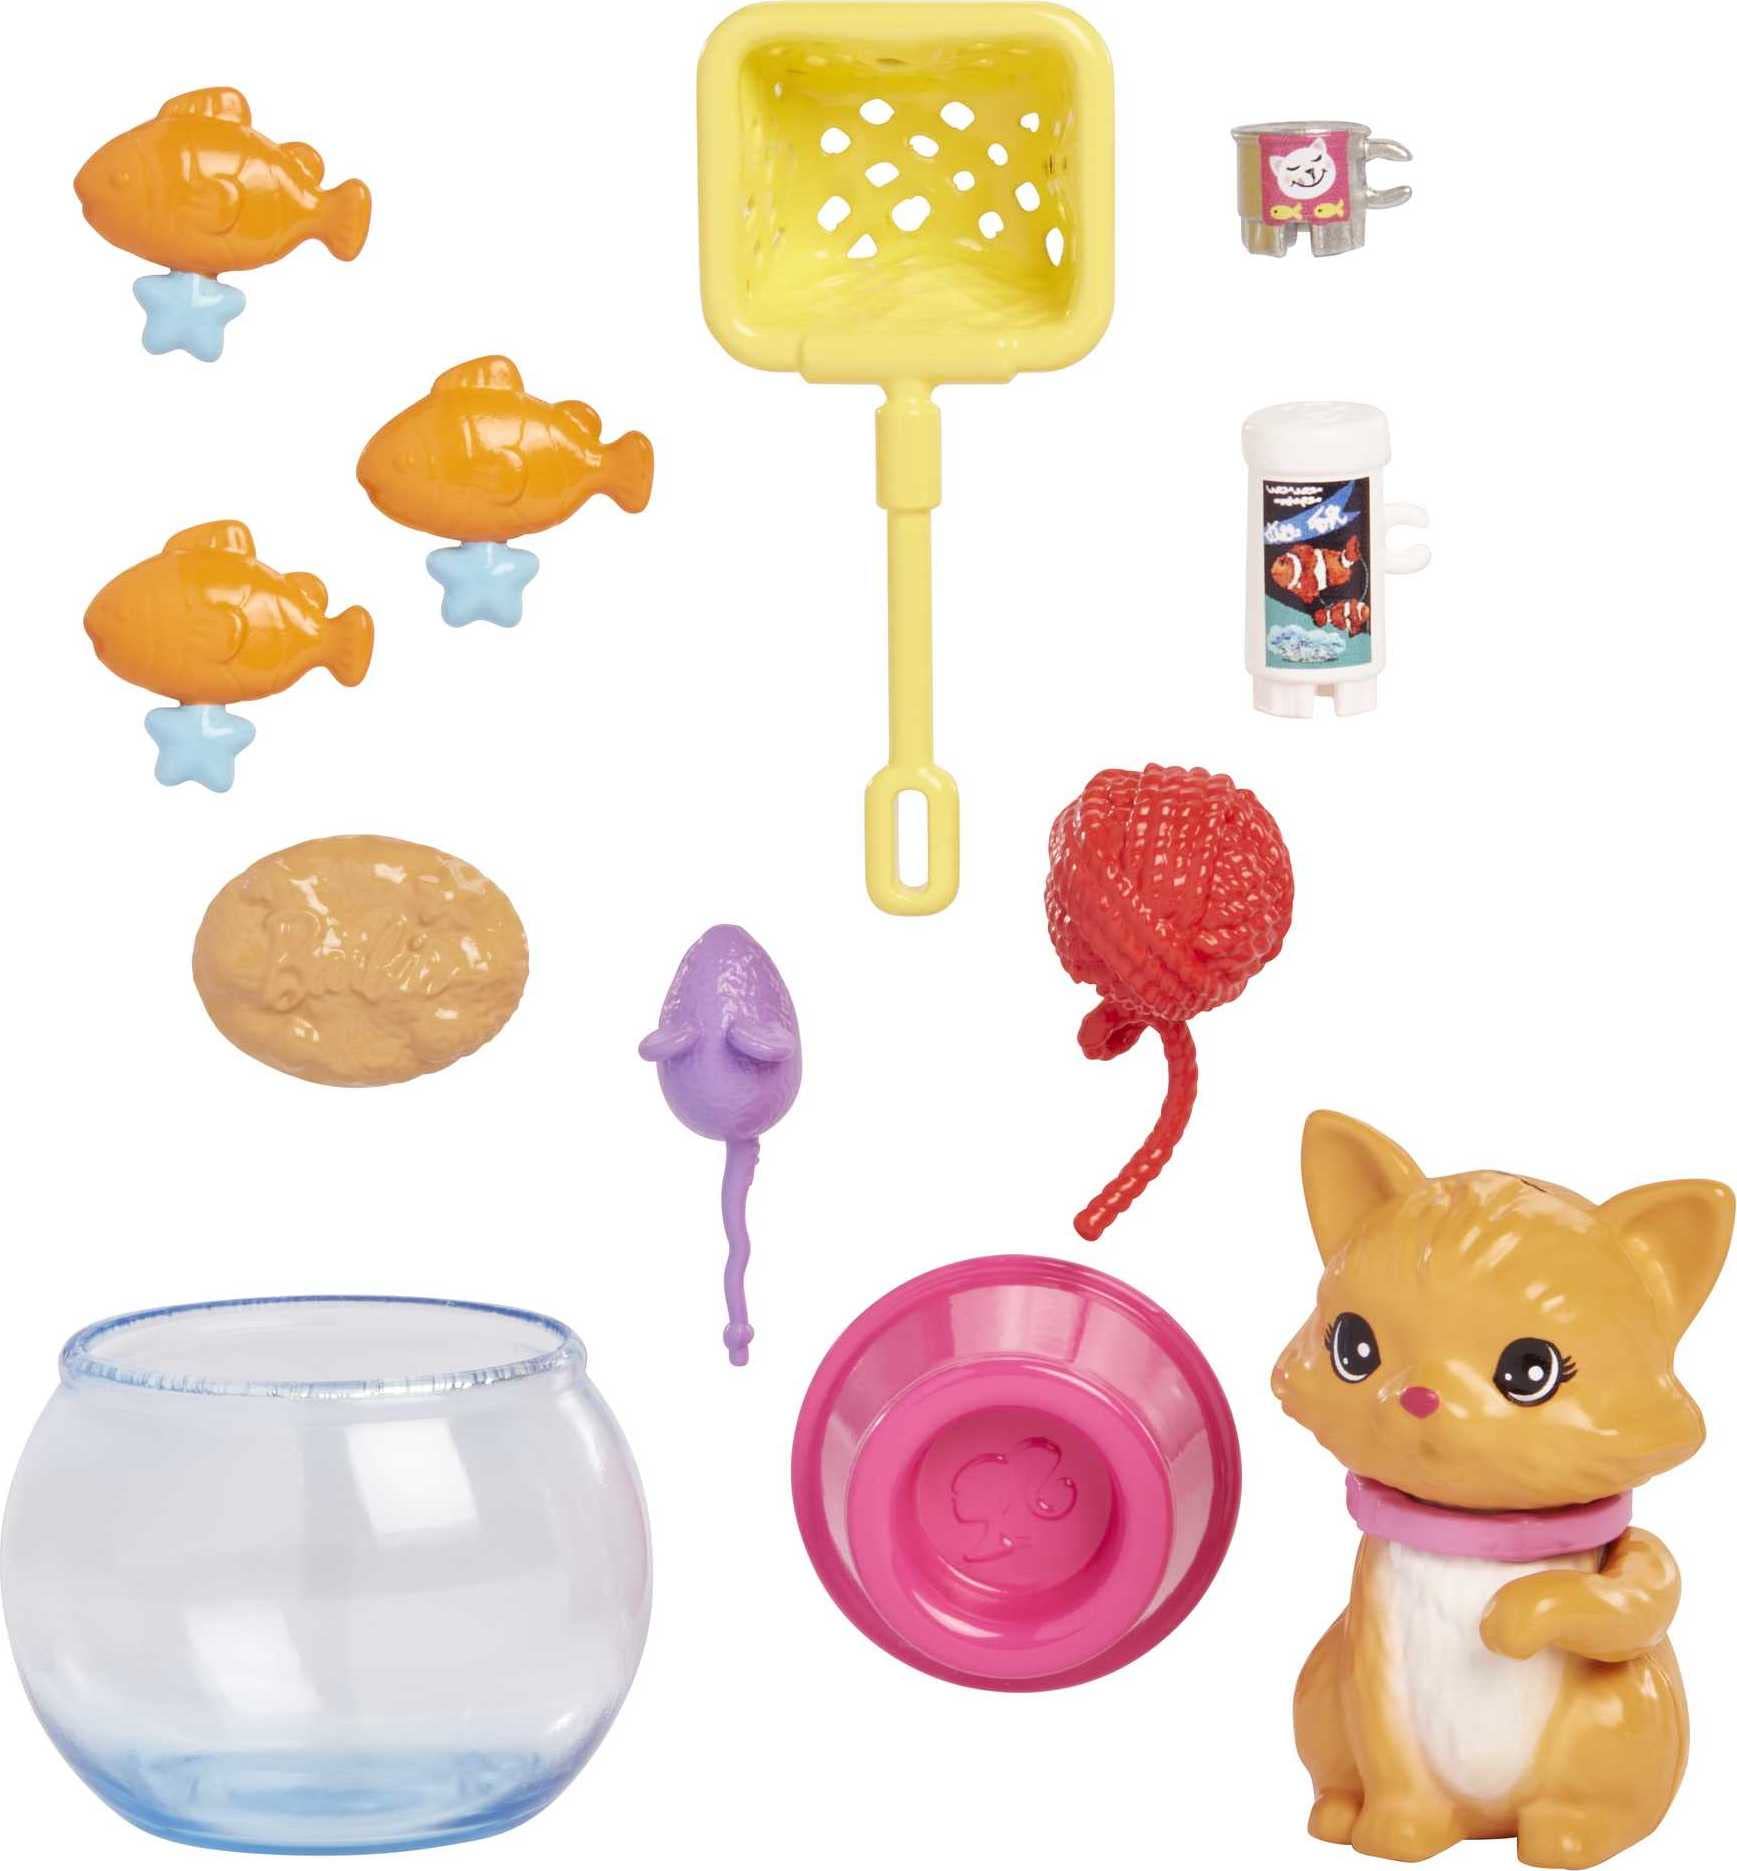 Barbie Pets and Accessories, Interactive Kitty Playset with Moving Paw and Head, 11 Animal Themed Pieces